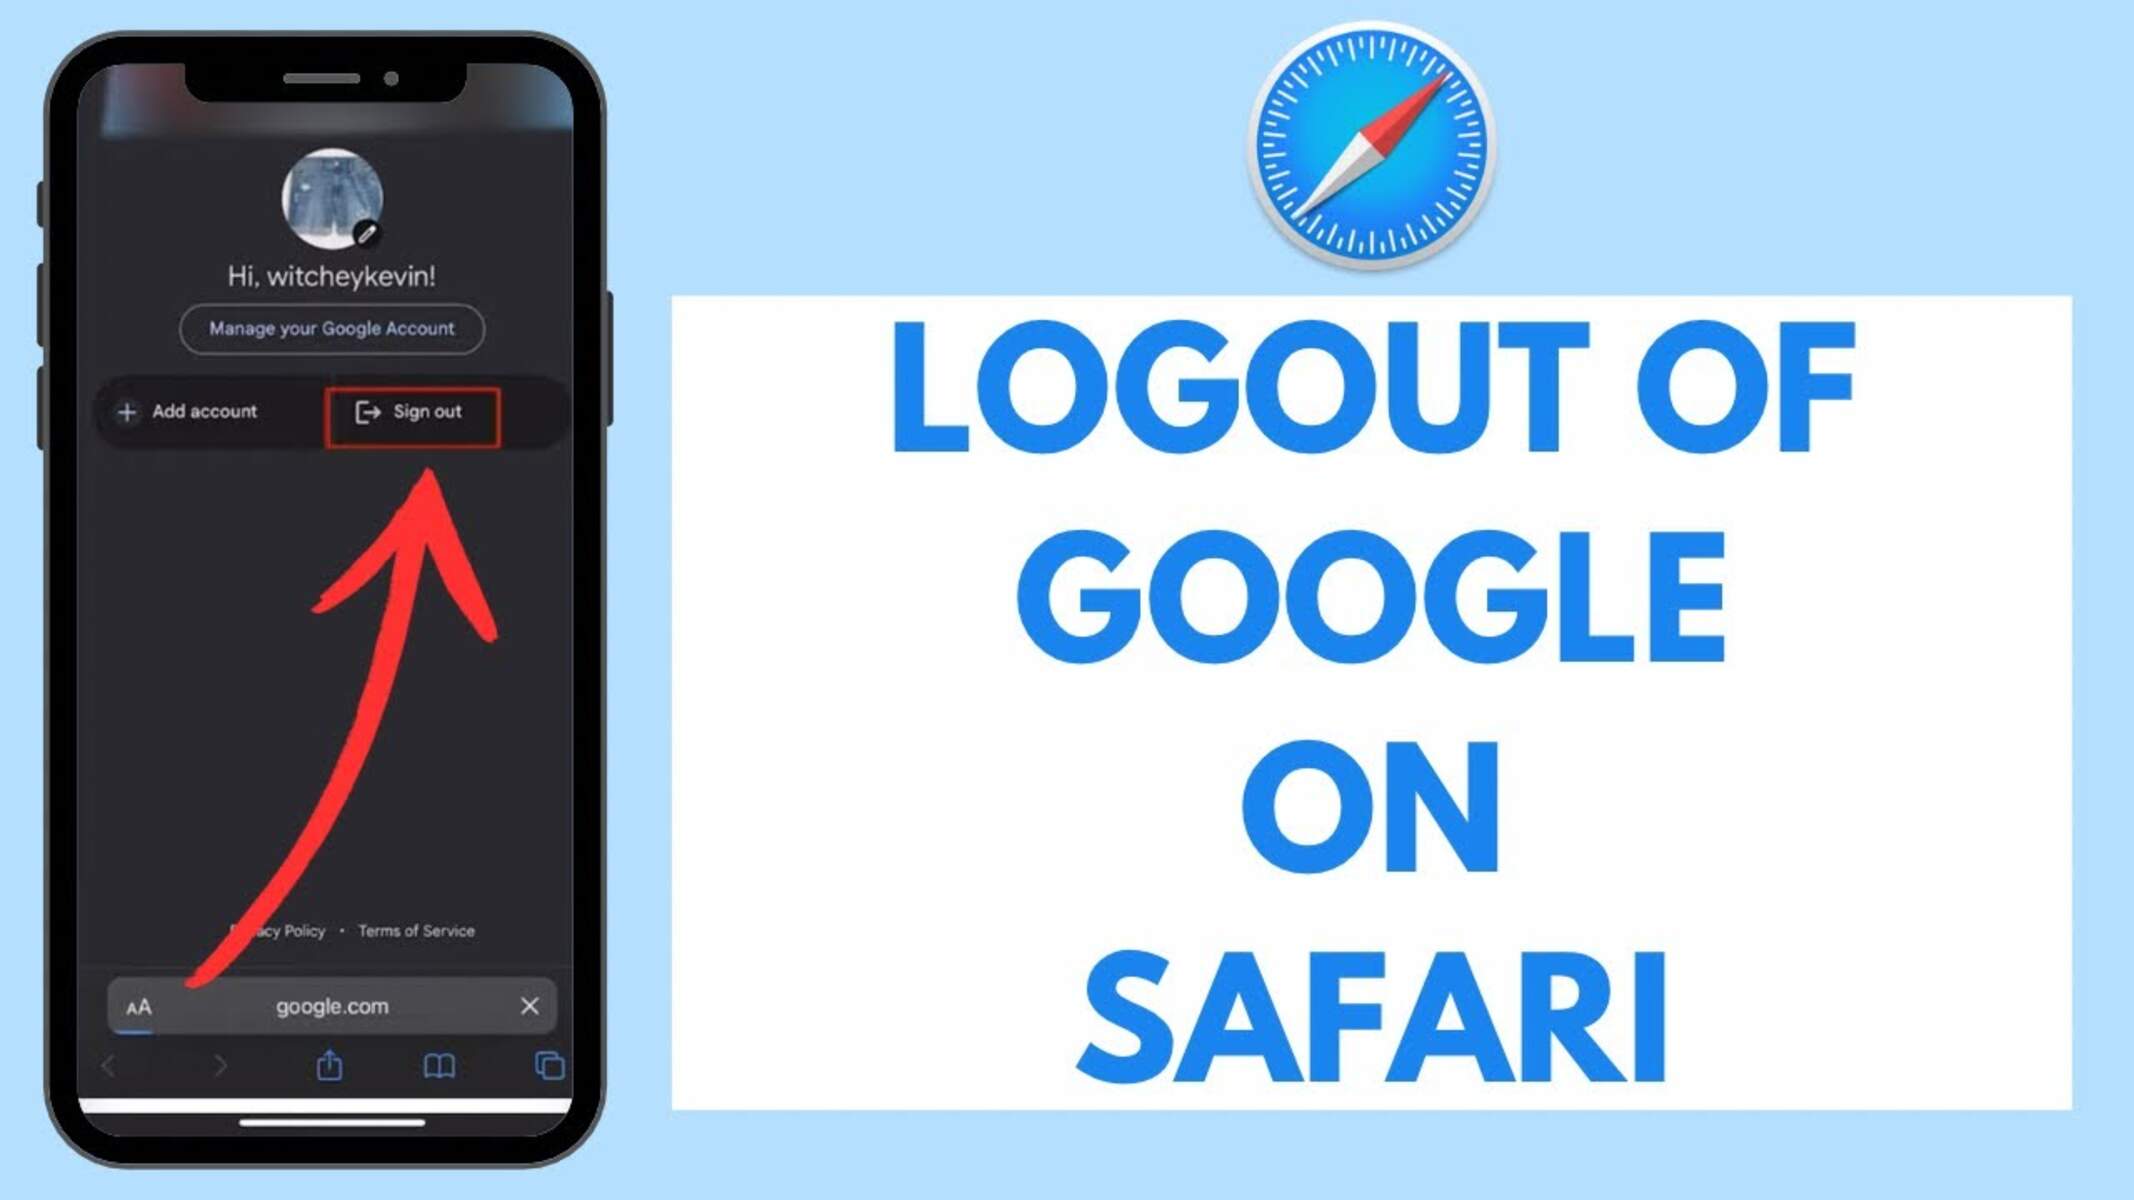 How To Log Out Of A Google Account On Safari